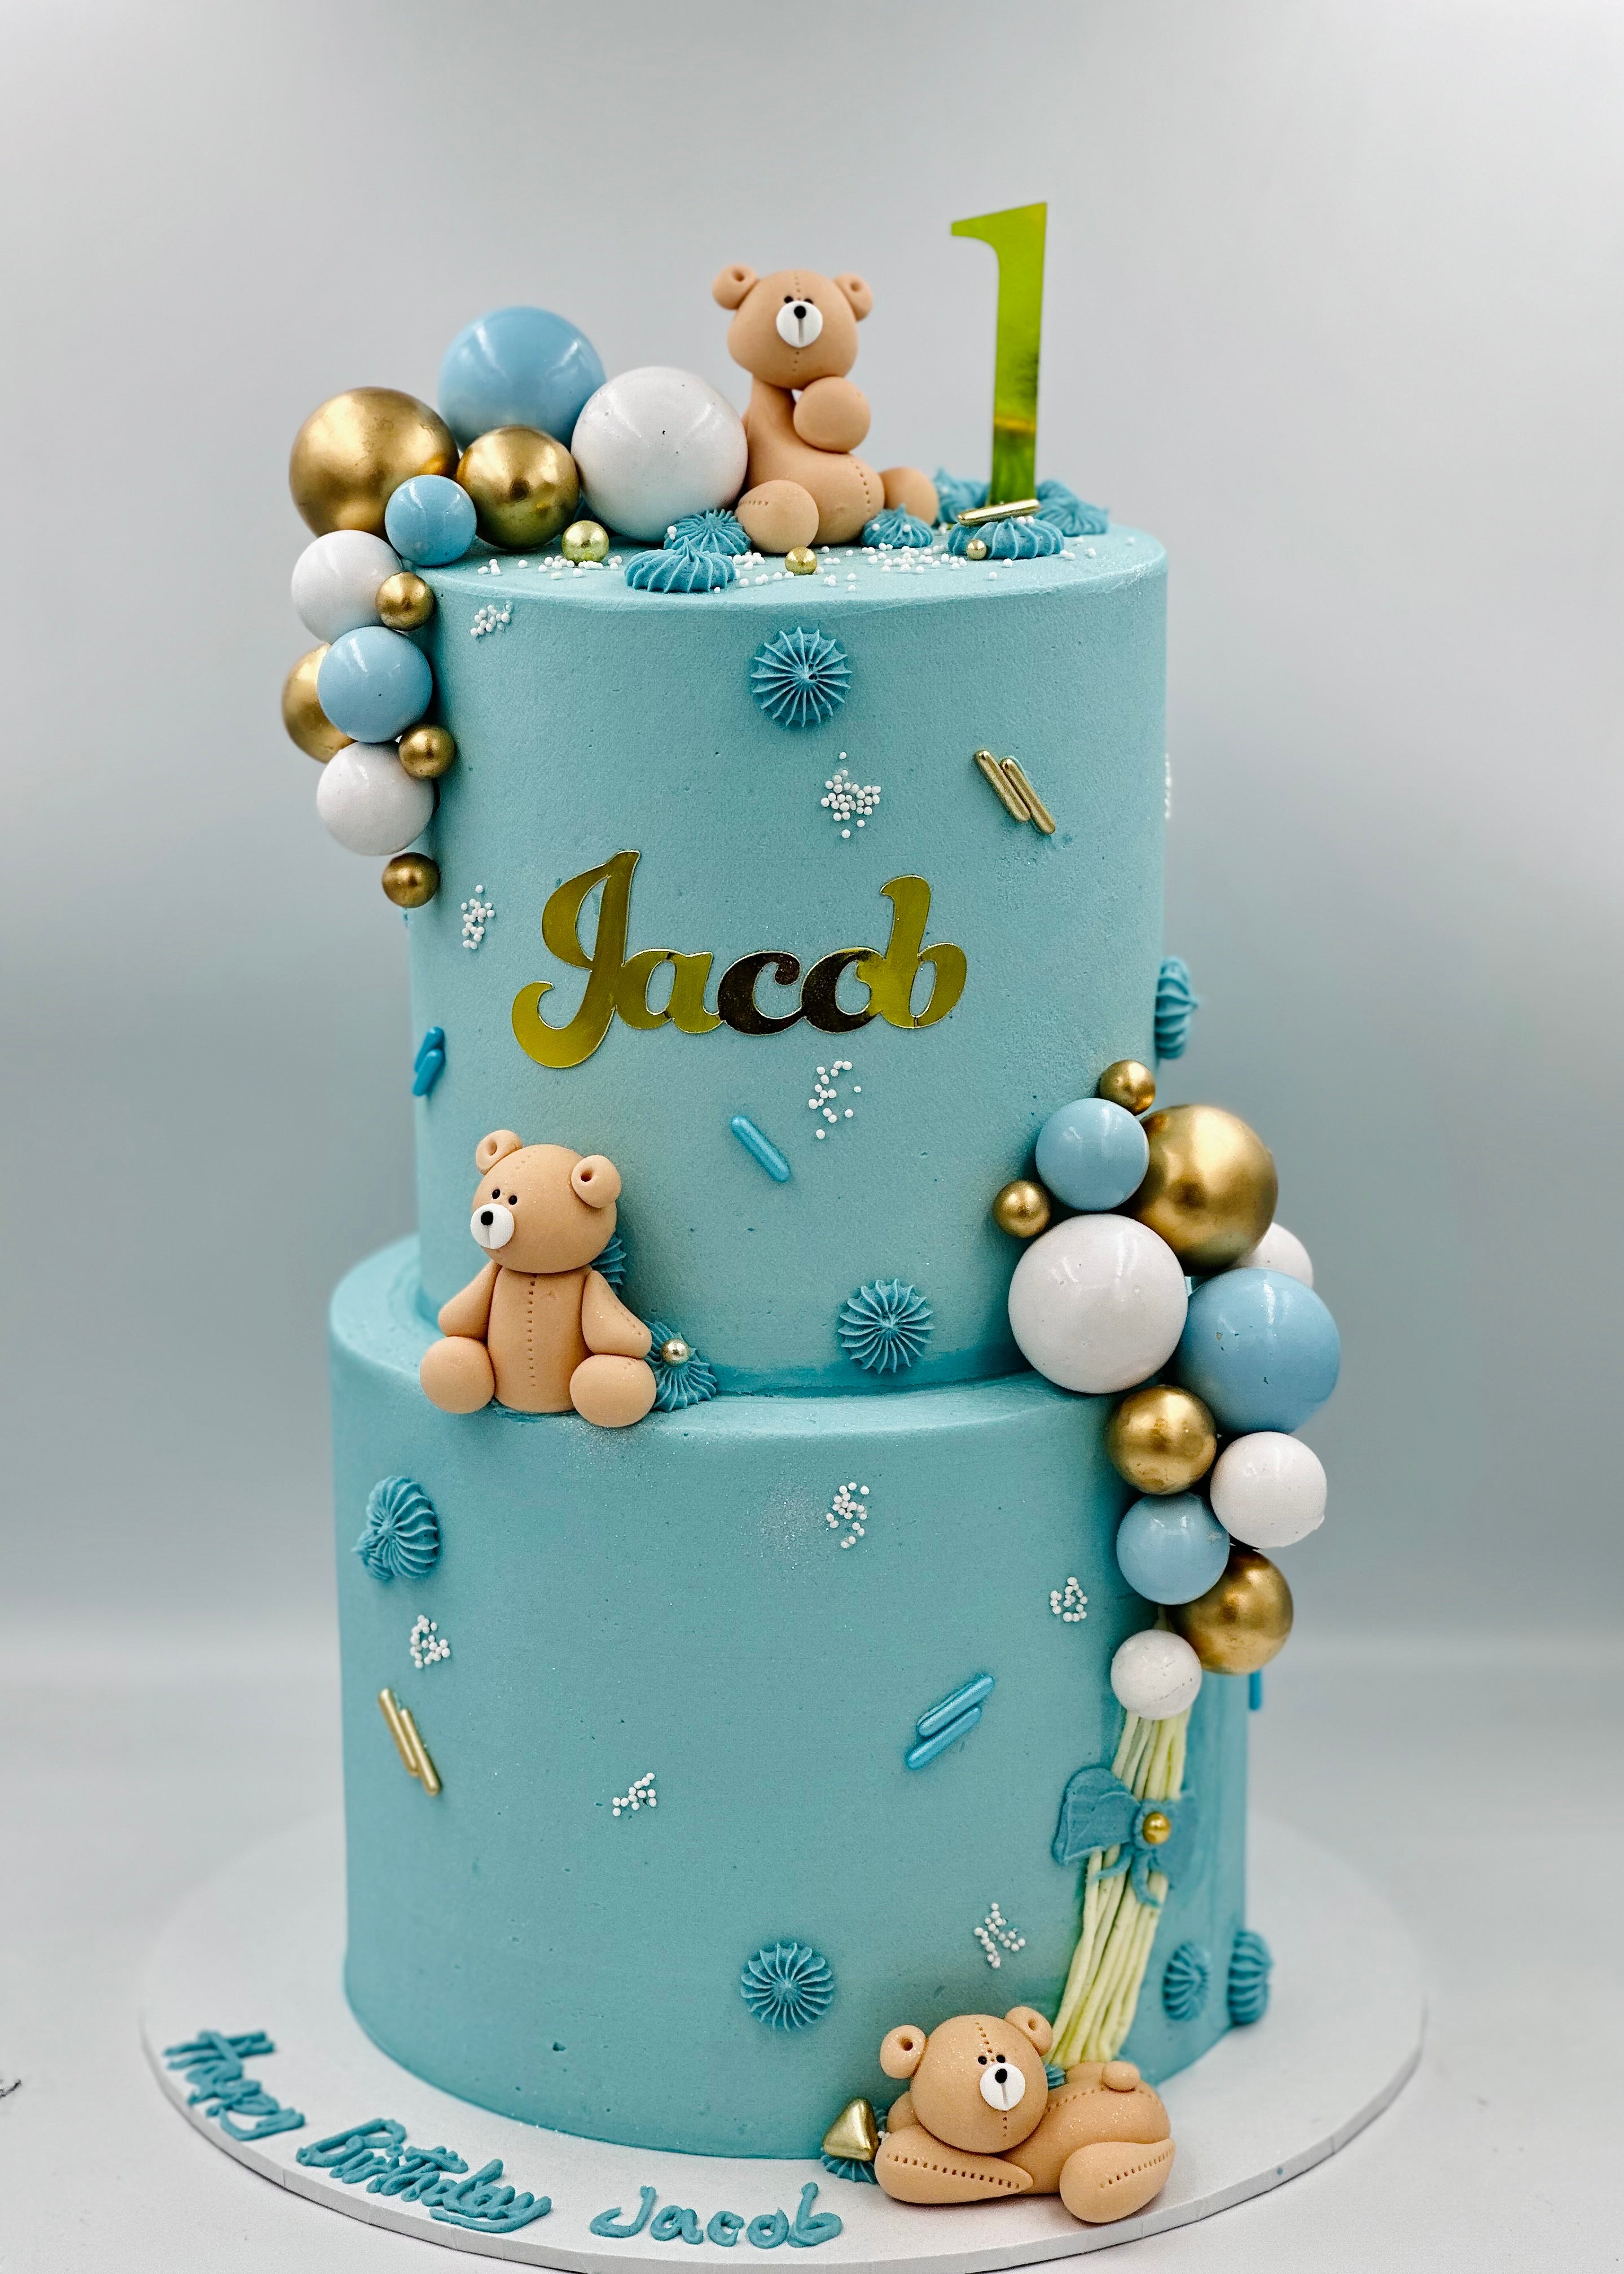 Order Teddy Bear Cream Cake 1 Kg Online at Best Price, Free Delivery|IGP  Cakes